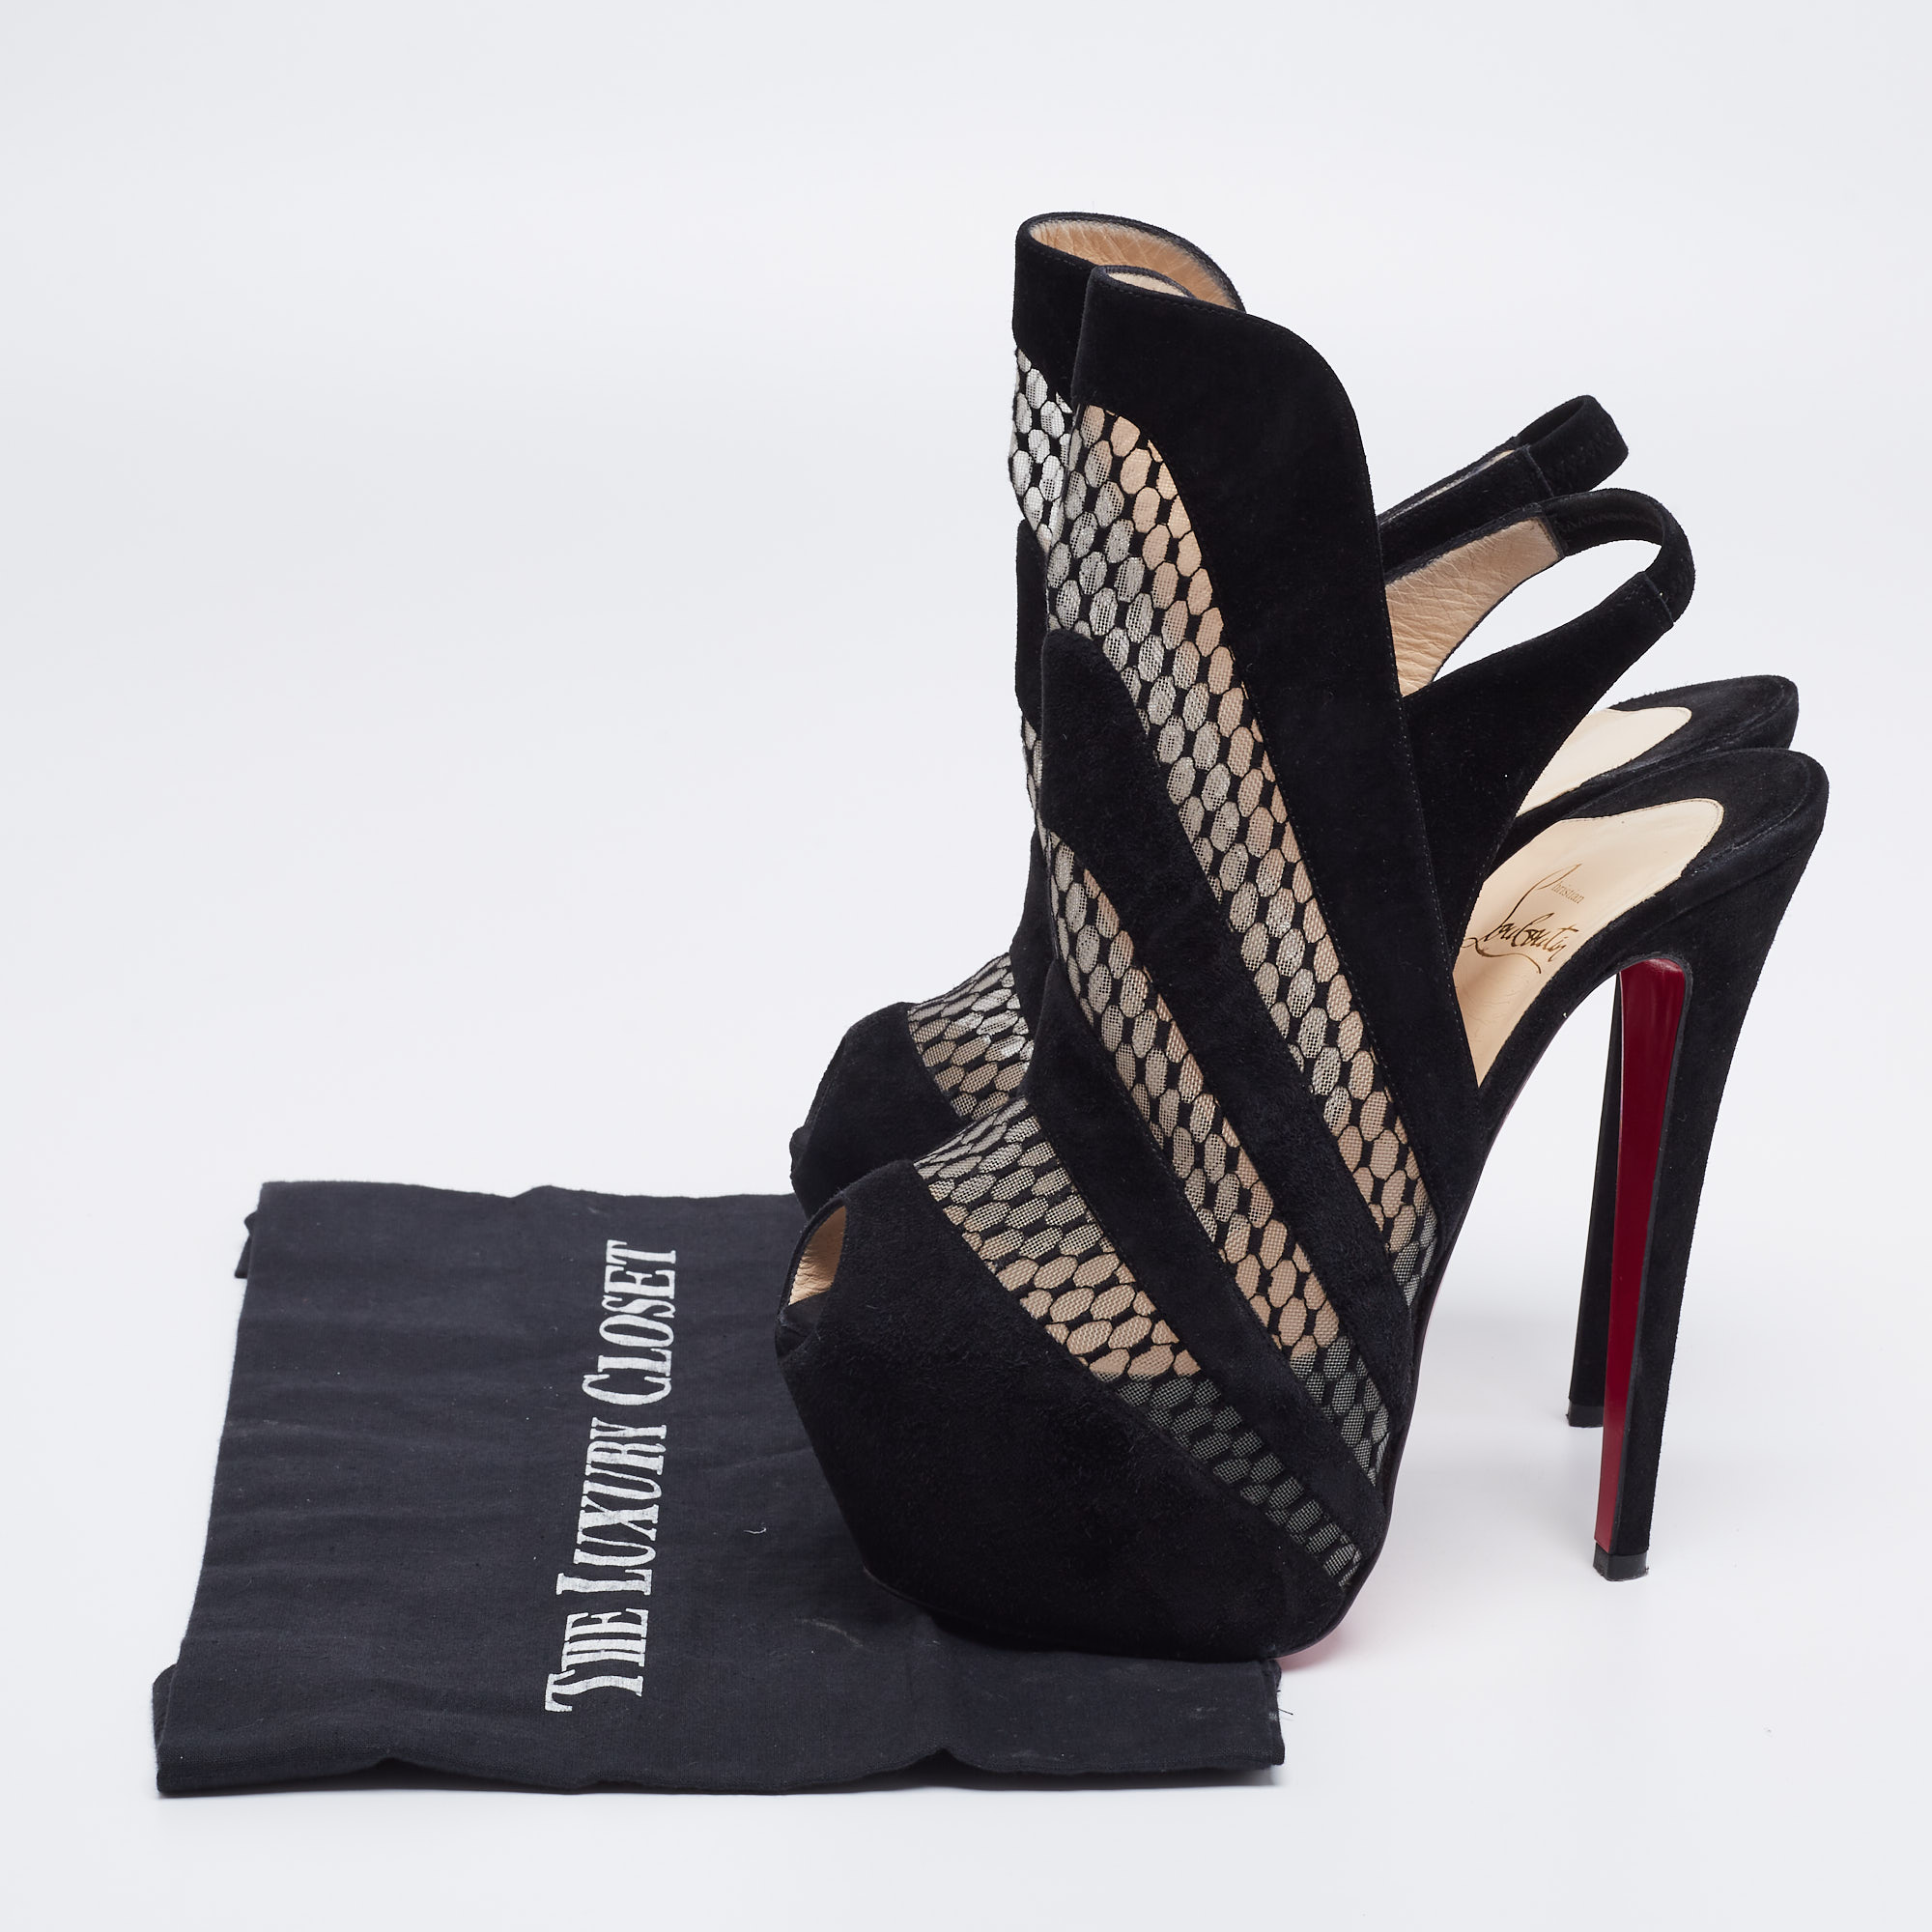 Christian Louboutin Black Suede And Mesh Guizi Platform Ankle Booties Size 38